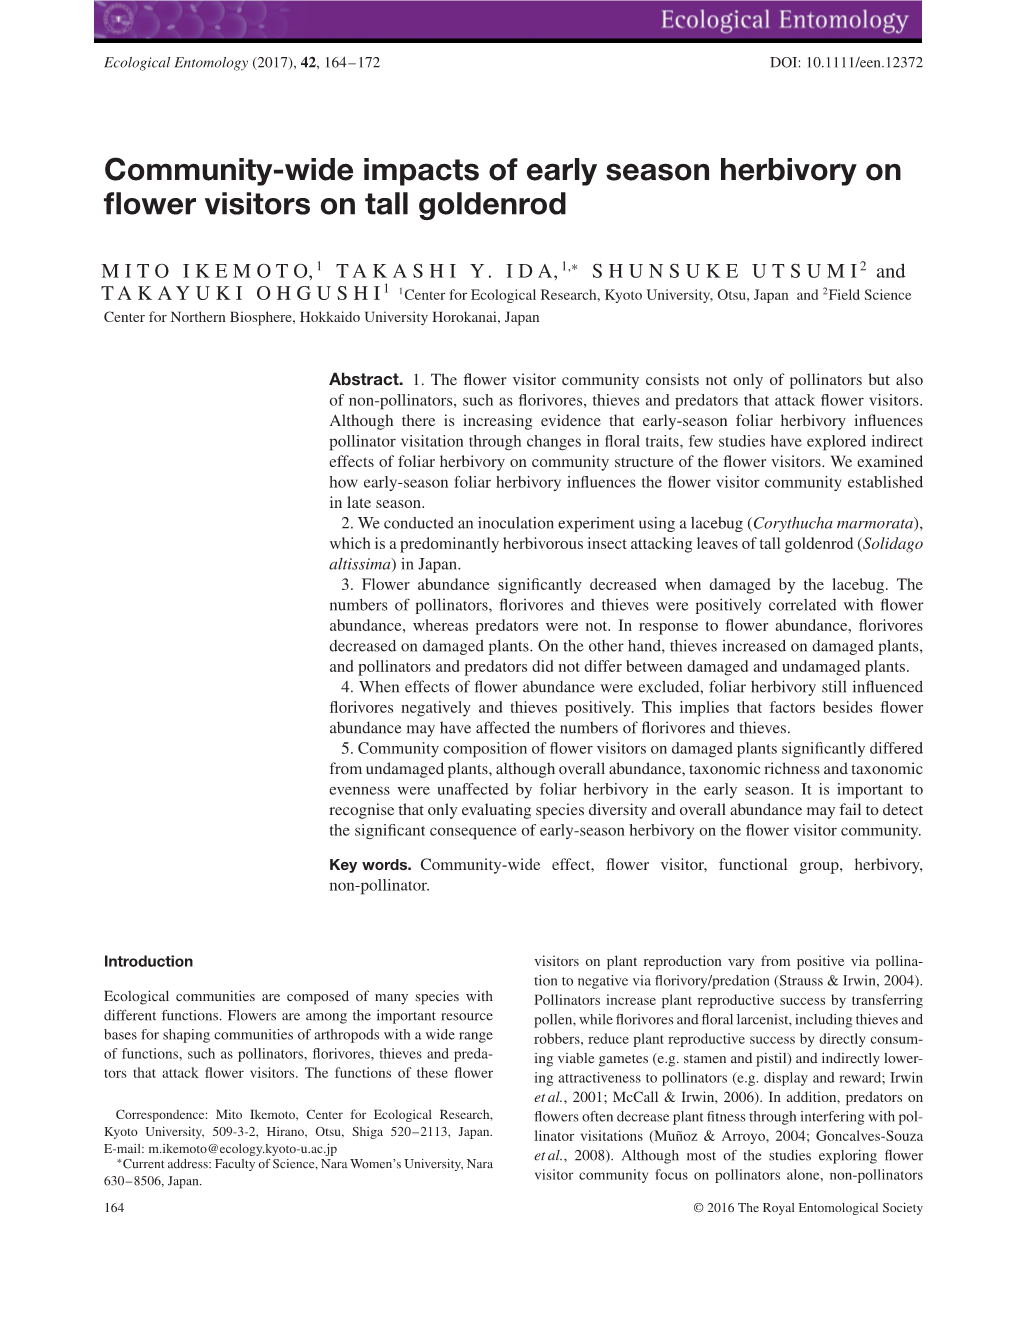 Community-Wide Impacts of Early Season Herbivory on Flower Visitors